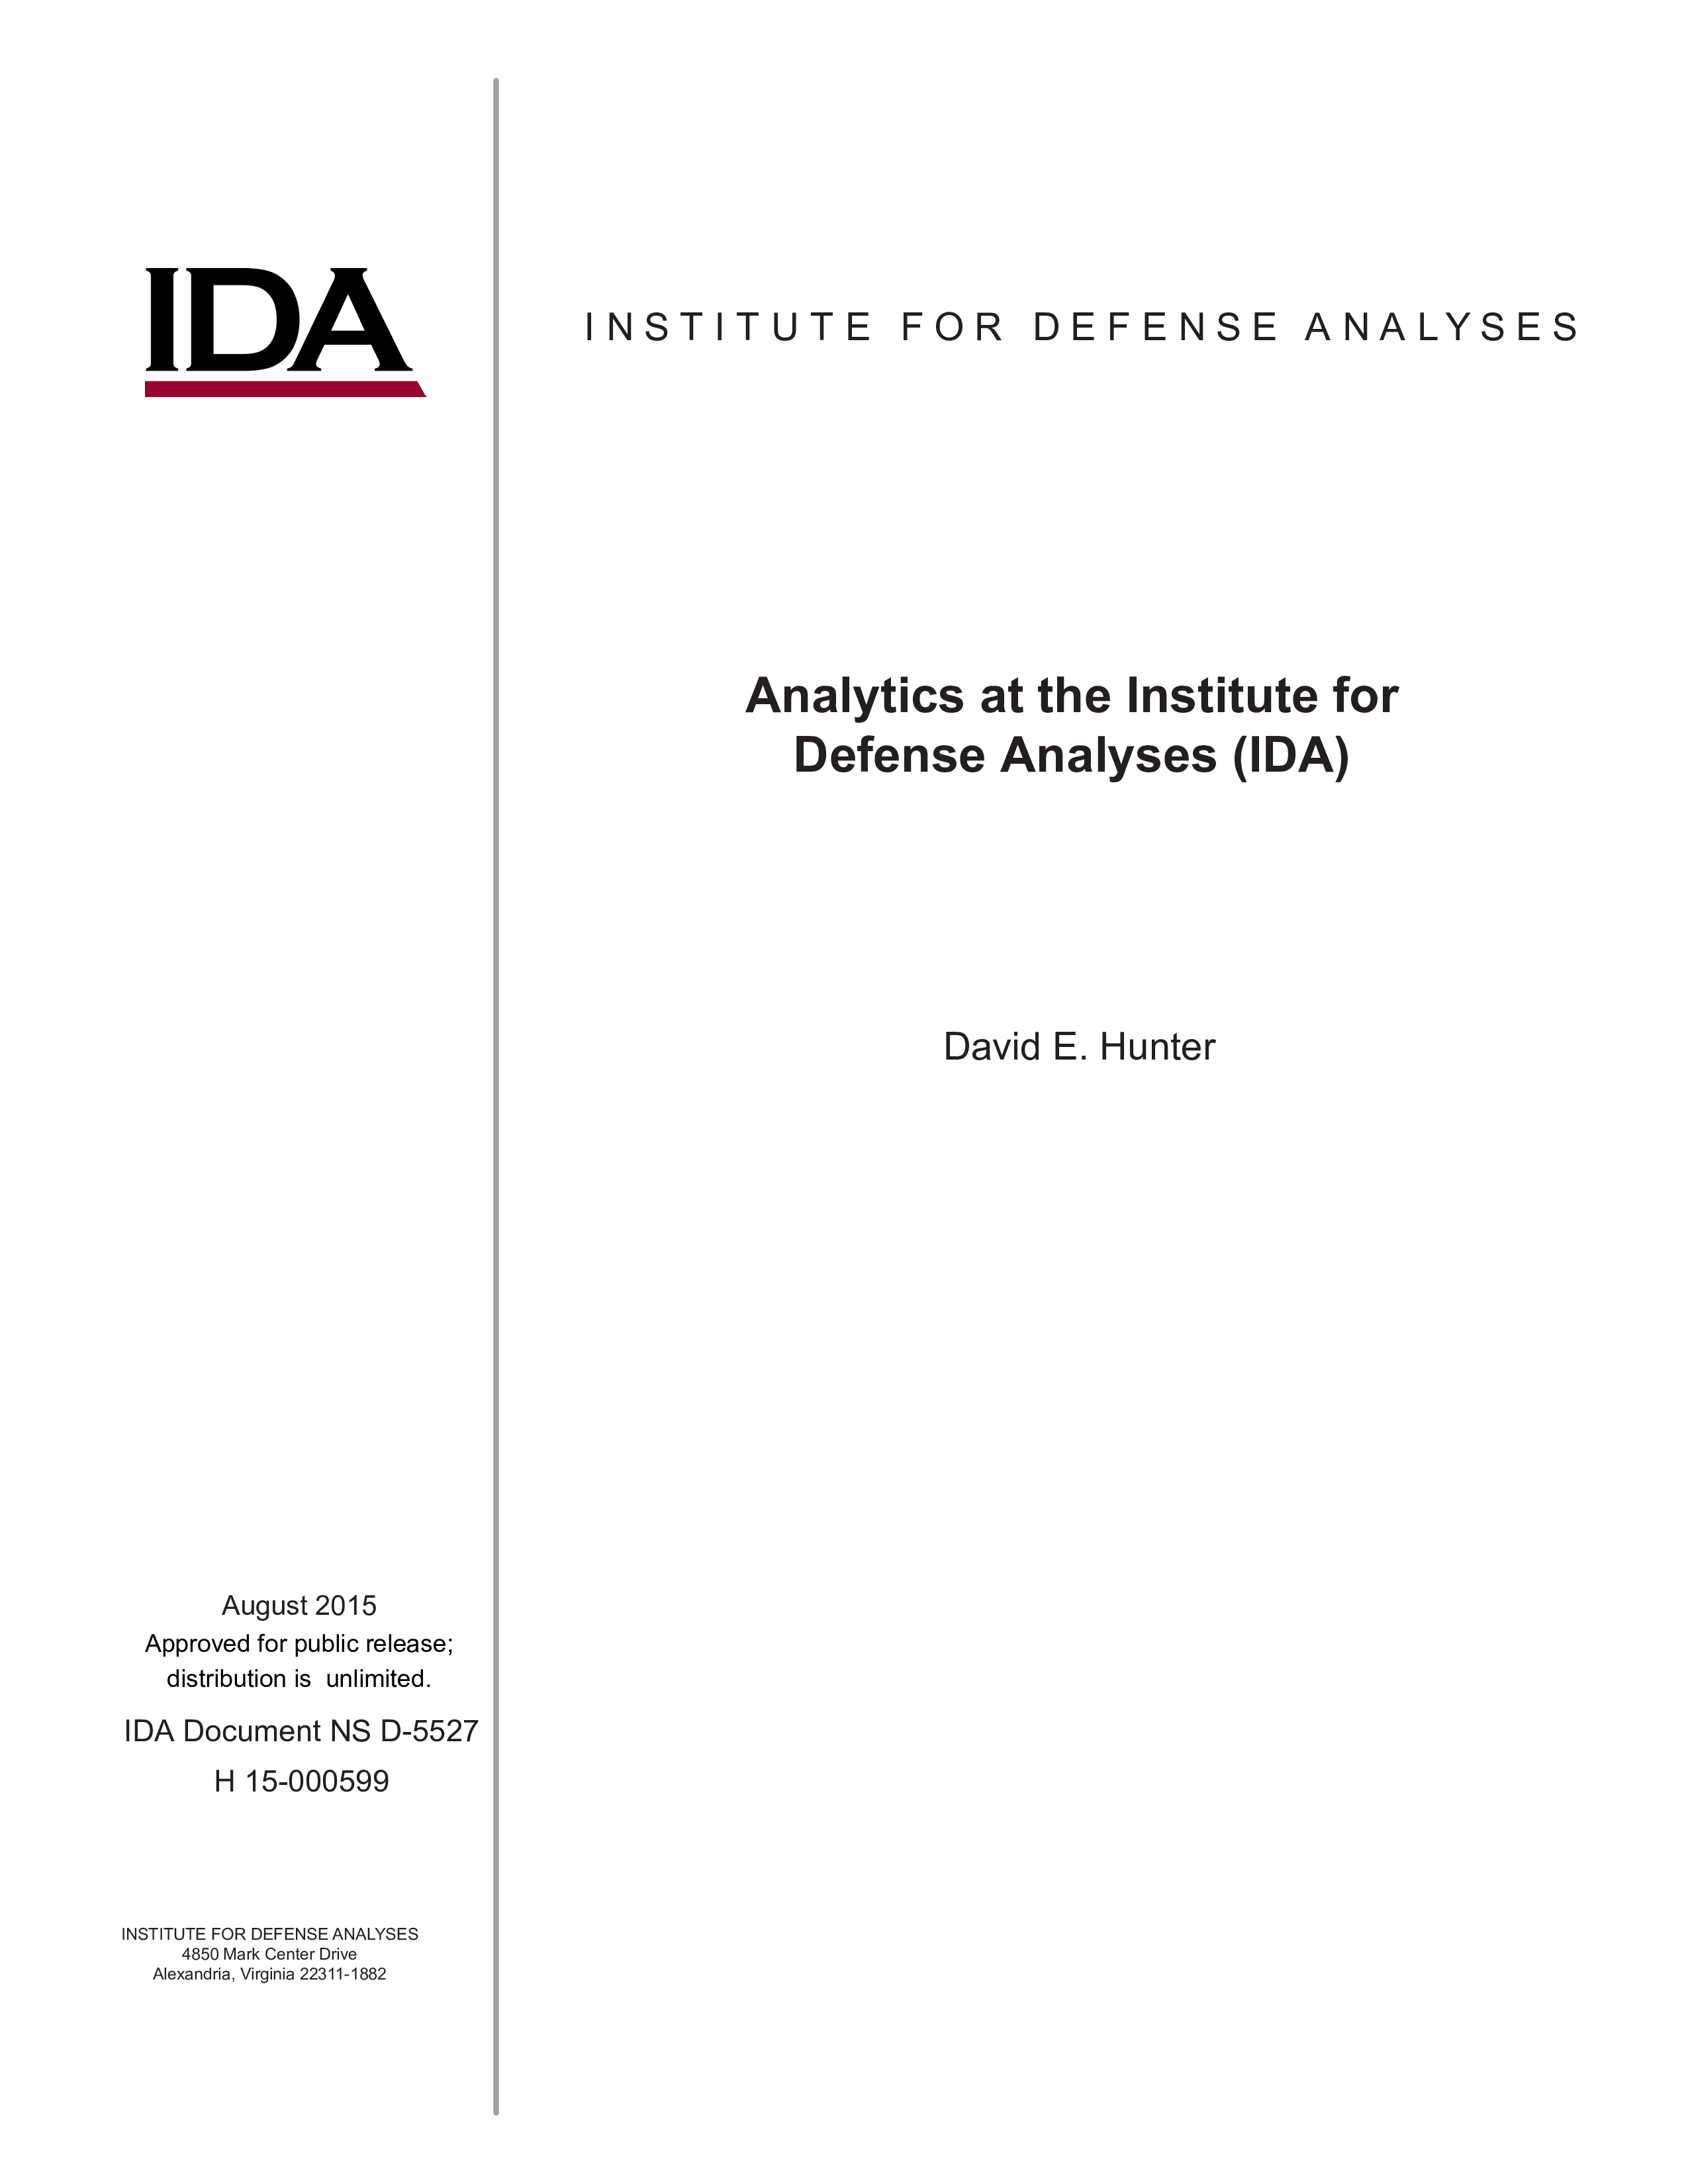 Analytics at the Institute for Defense Analyses